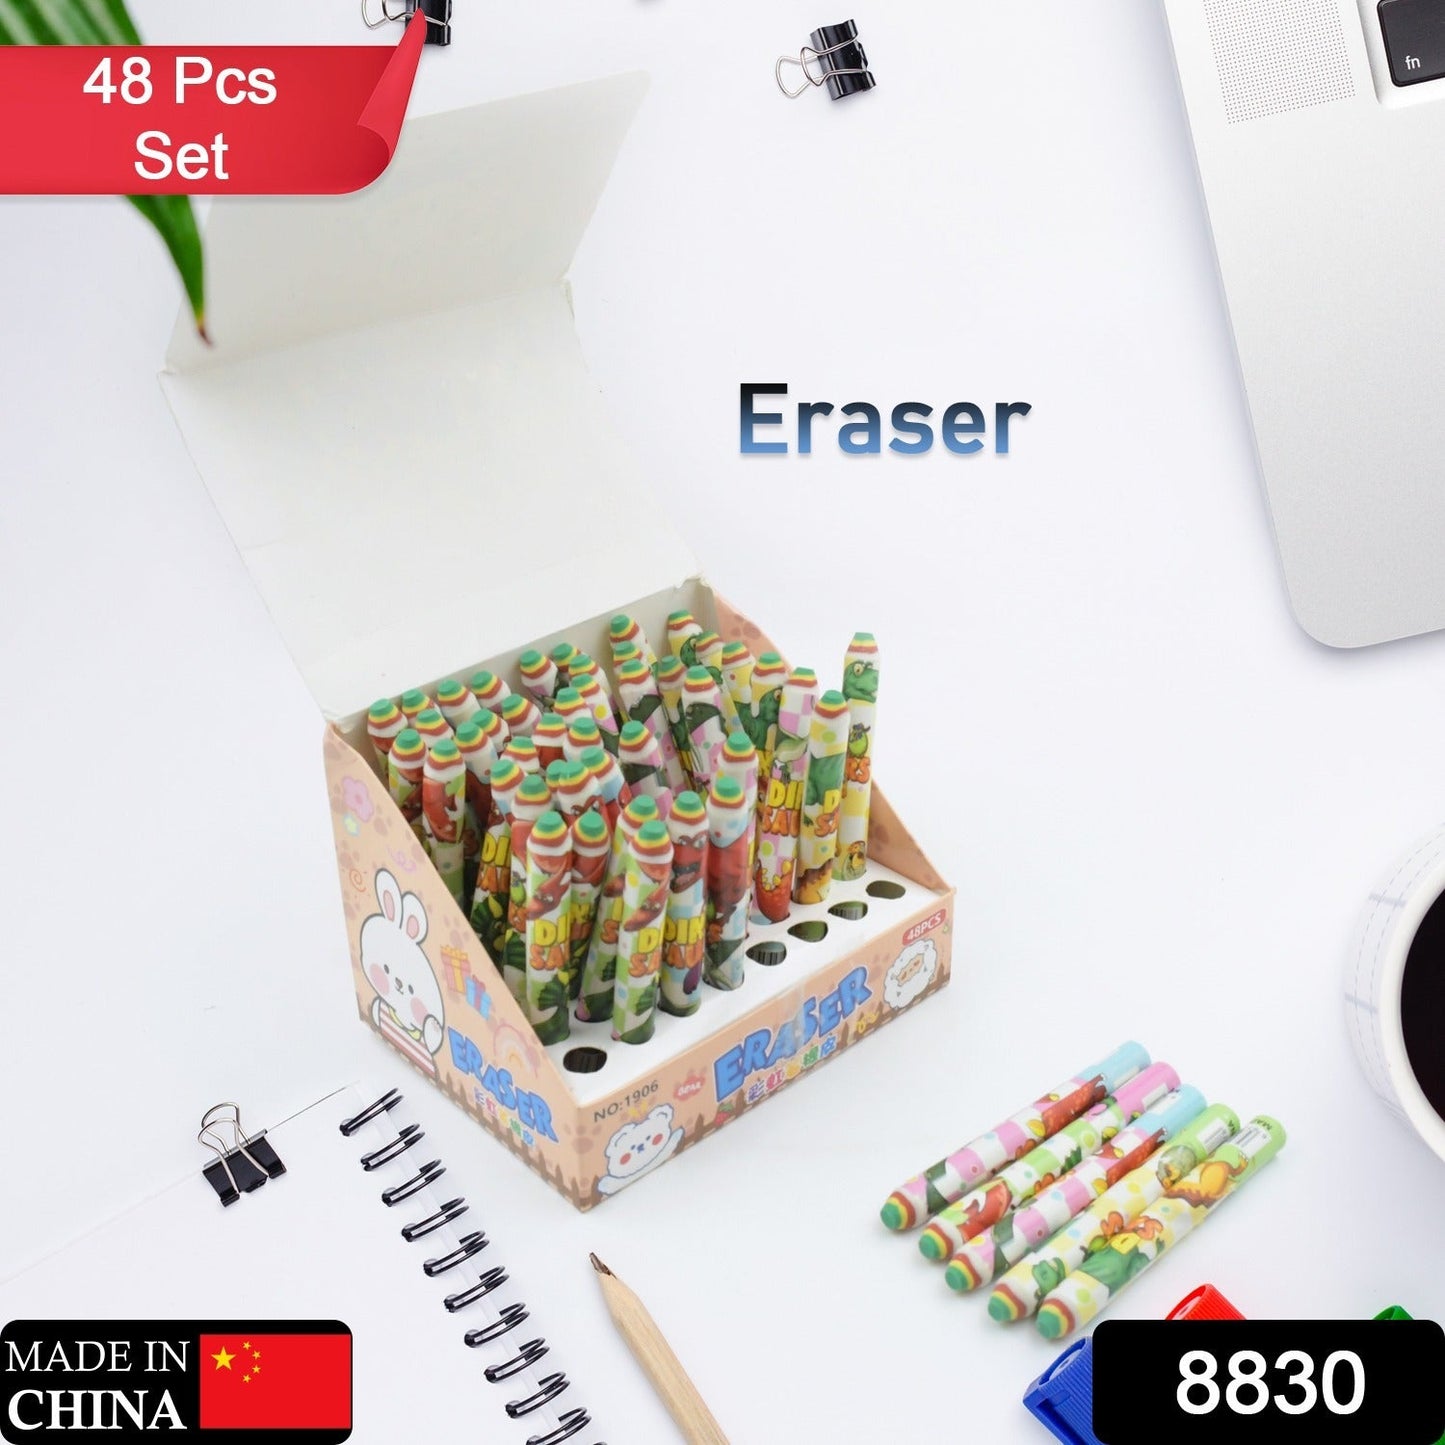 8830 Fancy Erasers for Kids in Different Shapes – Rainbow Erasers, Stationery Gift for Kids Pencil Shaped Eraser for Children School Kids/Birthday Return Gift for Children (48 Pcs Set) - deal99.in